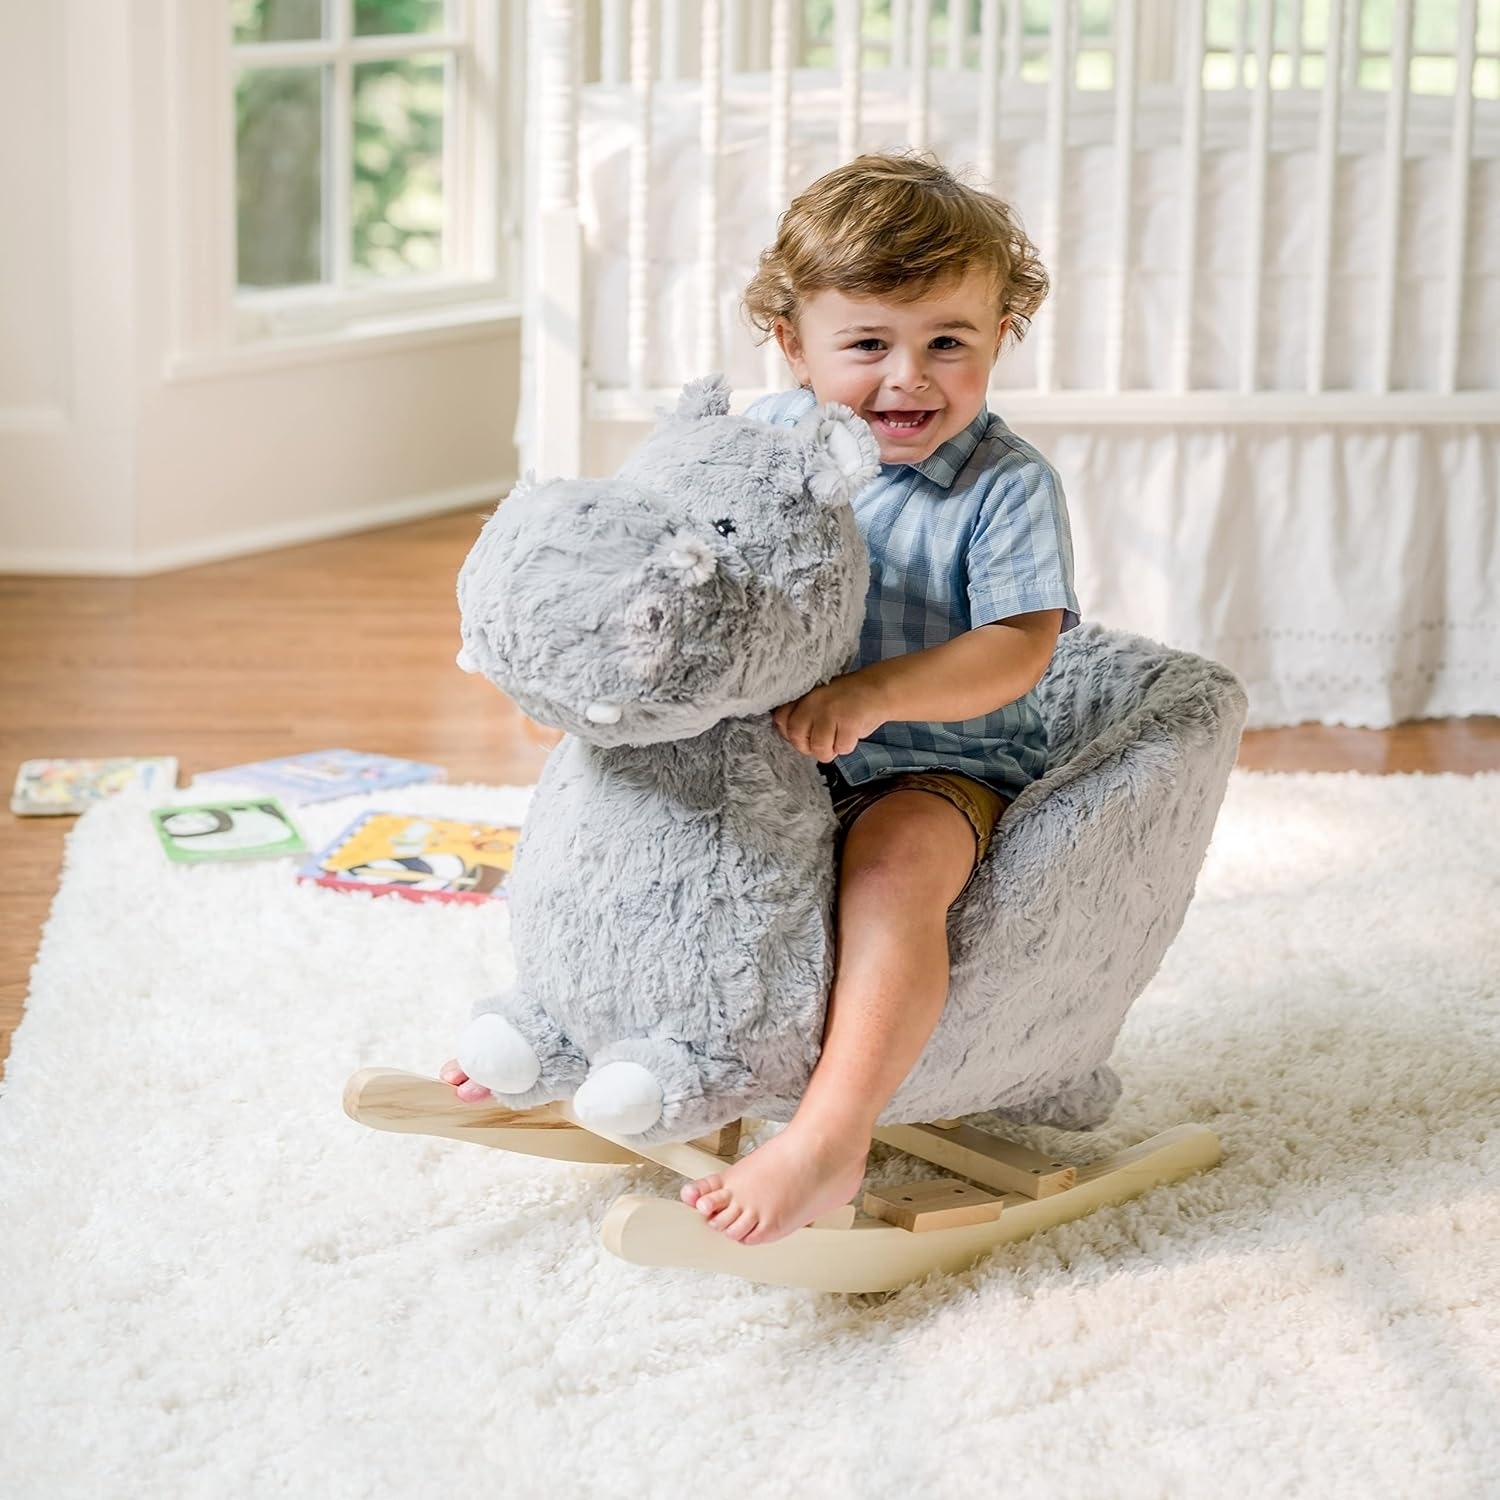 Child smiling on a plush hippo rocker toy in a home setting